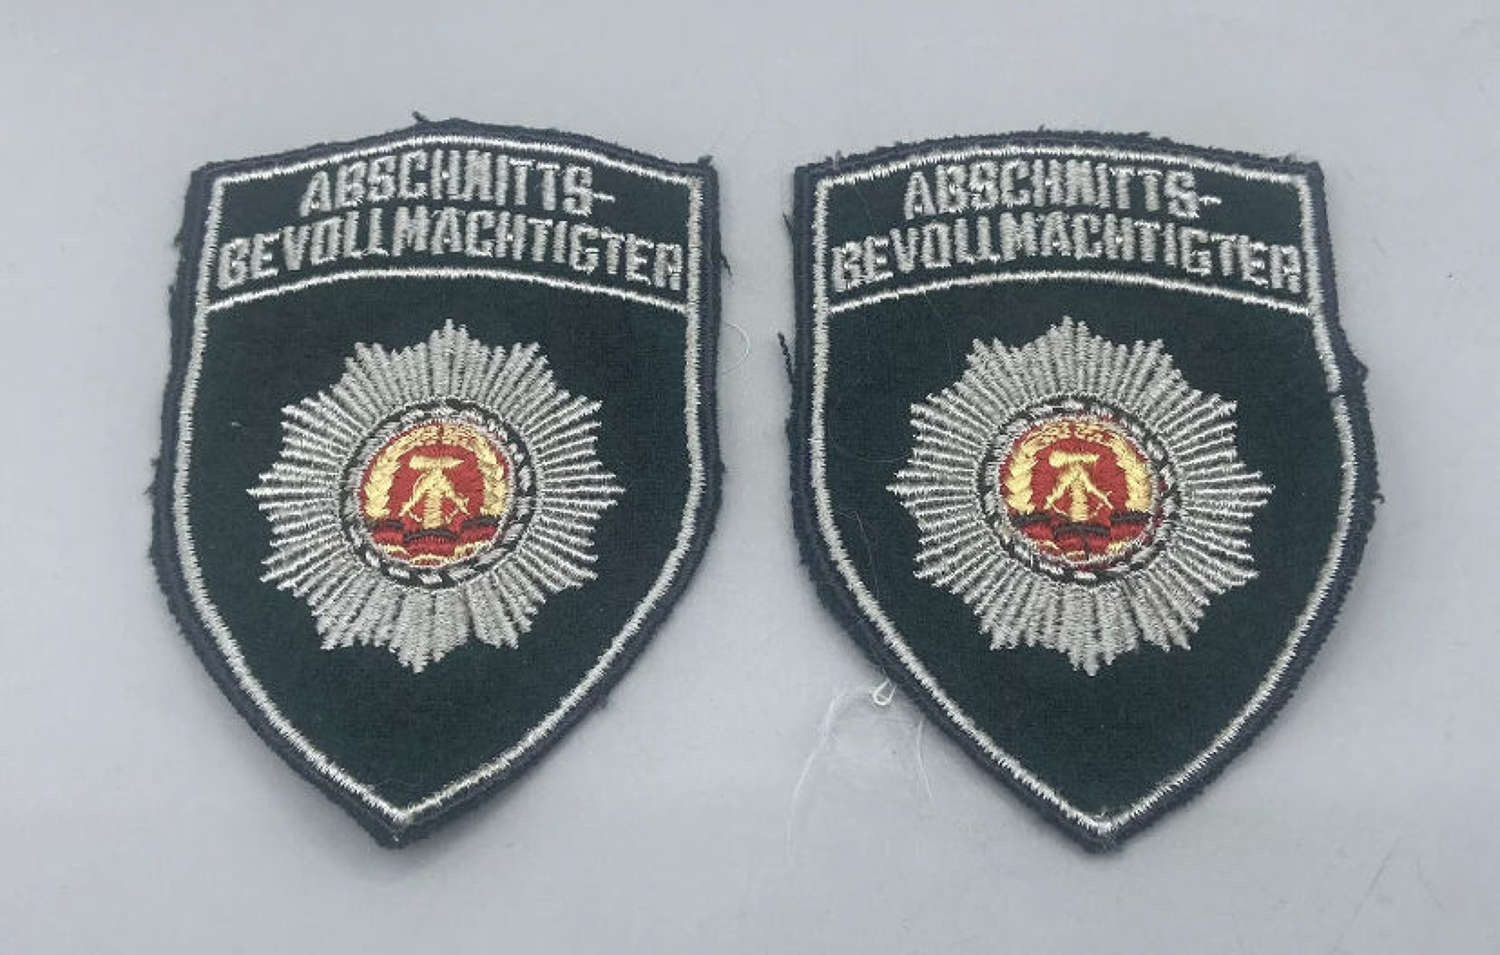 1950s DDR ABV Military Police Shoulder Identification Patches